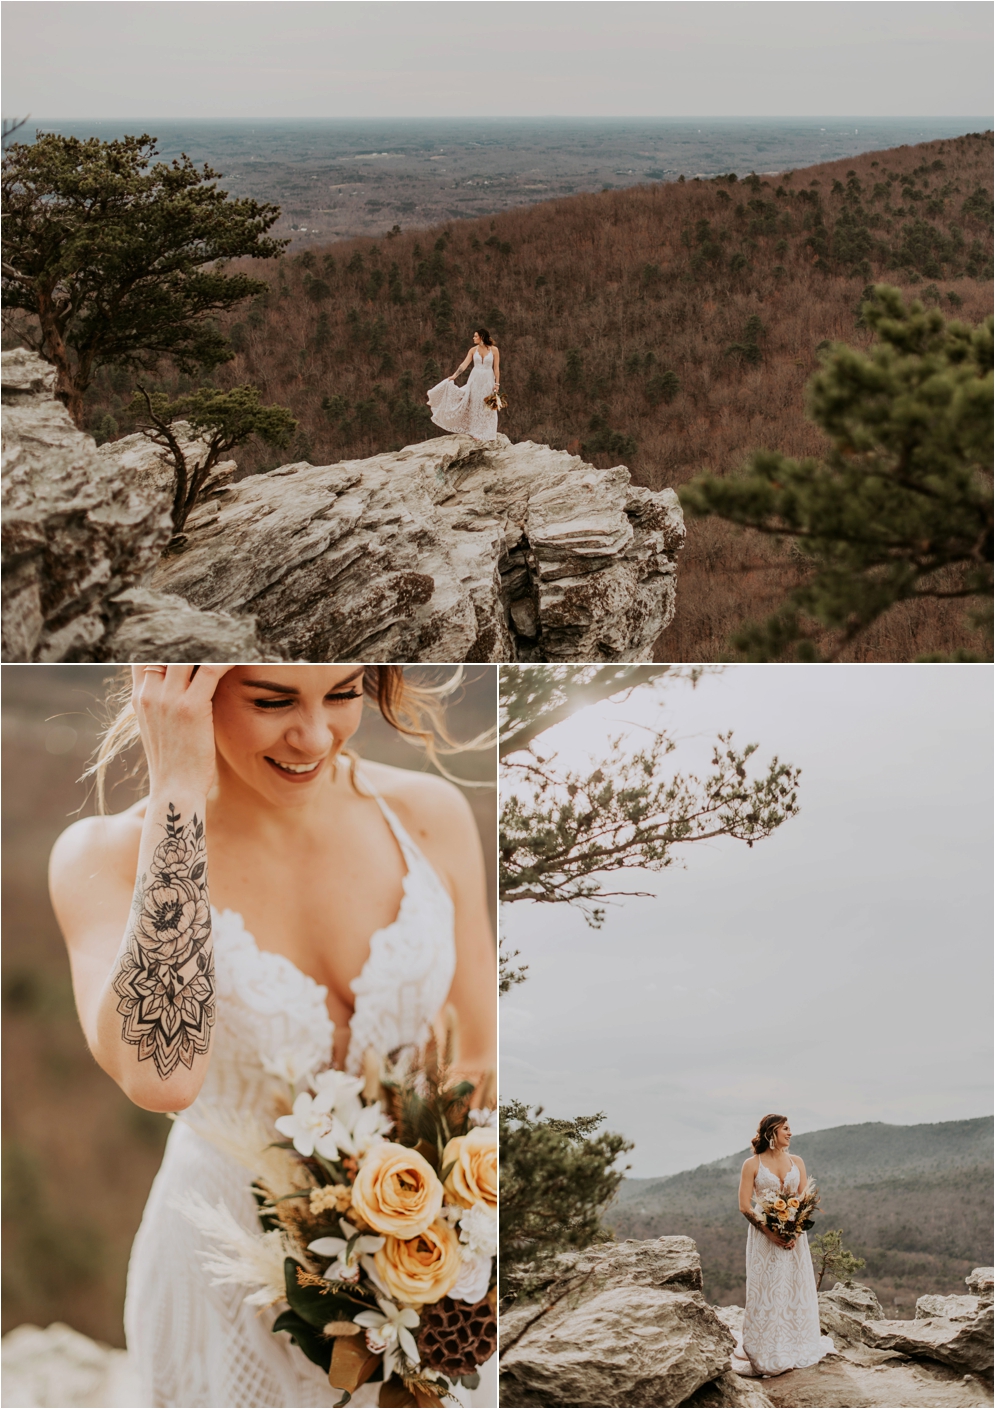 Hanging Rock State Park, Hayley Paige Wedding Dress, Southern Blooms, Carbon Compass Beauty Bar, Wildflower Bridal, Modern Boho Bride, Bohemian Bride, Bridals, See You Clayter, Connection Photography, Asheville Wedding Photographer, Adventurous Wedding Photographer, Charlotte Wedding Photographer, bride with tattoos